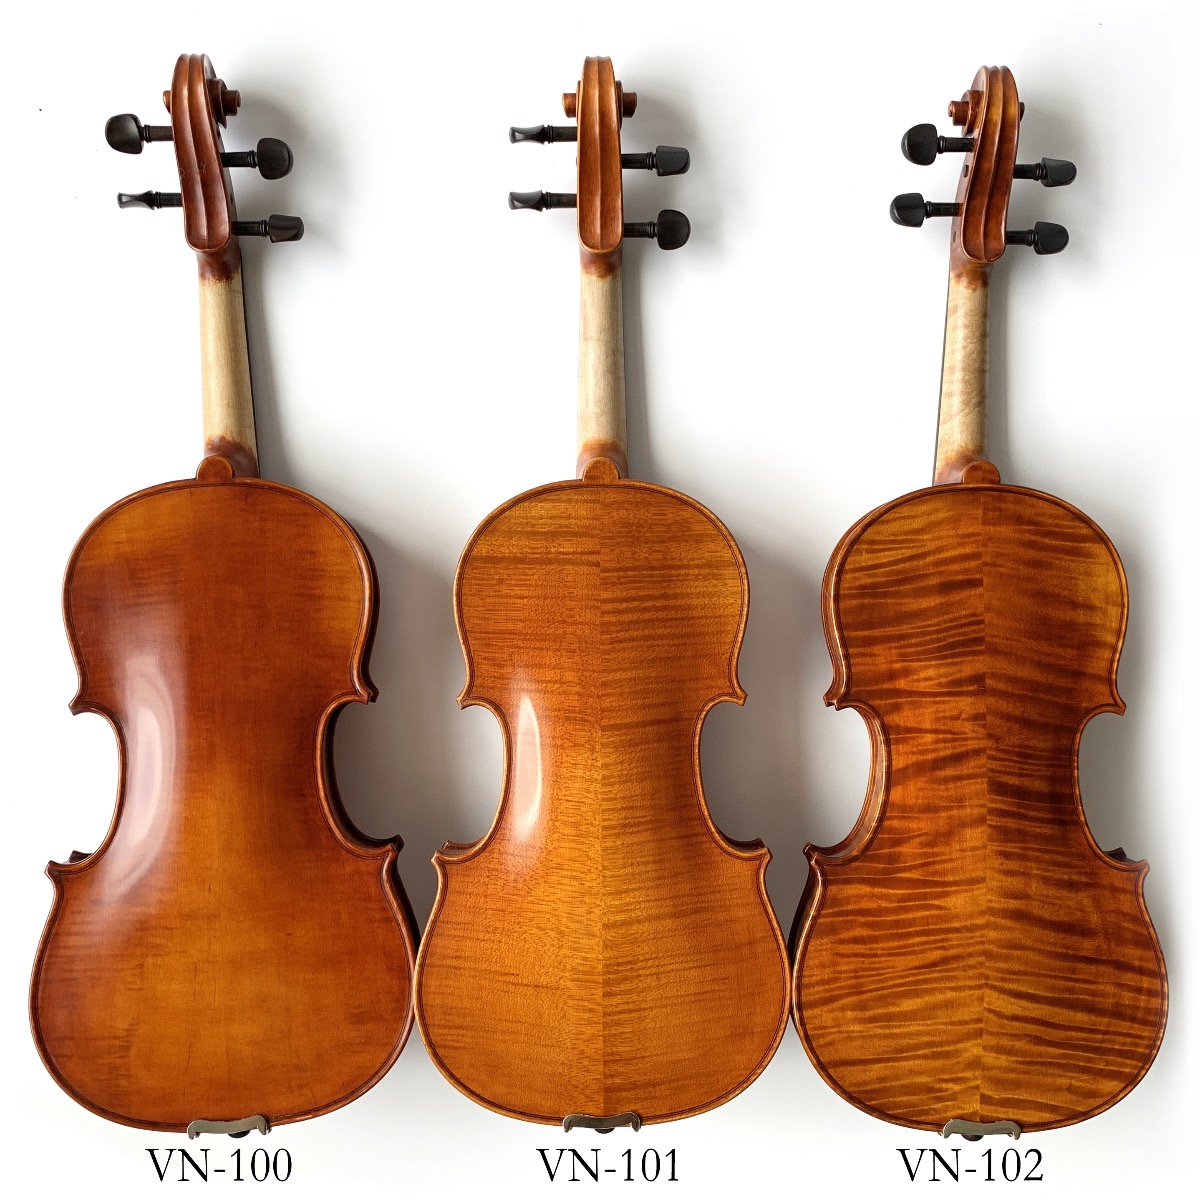 The VN-100, 101 and 102 are stunning violins